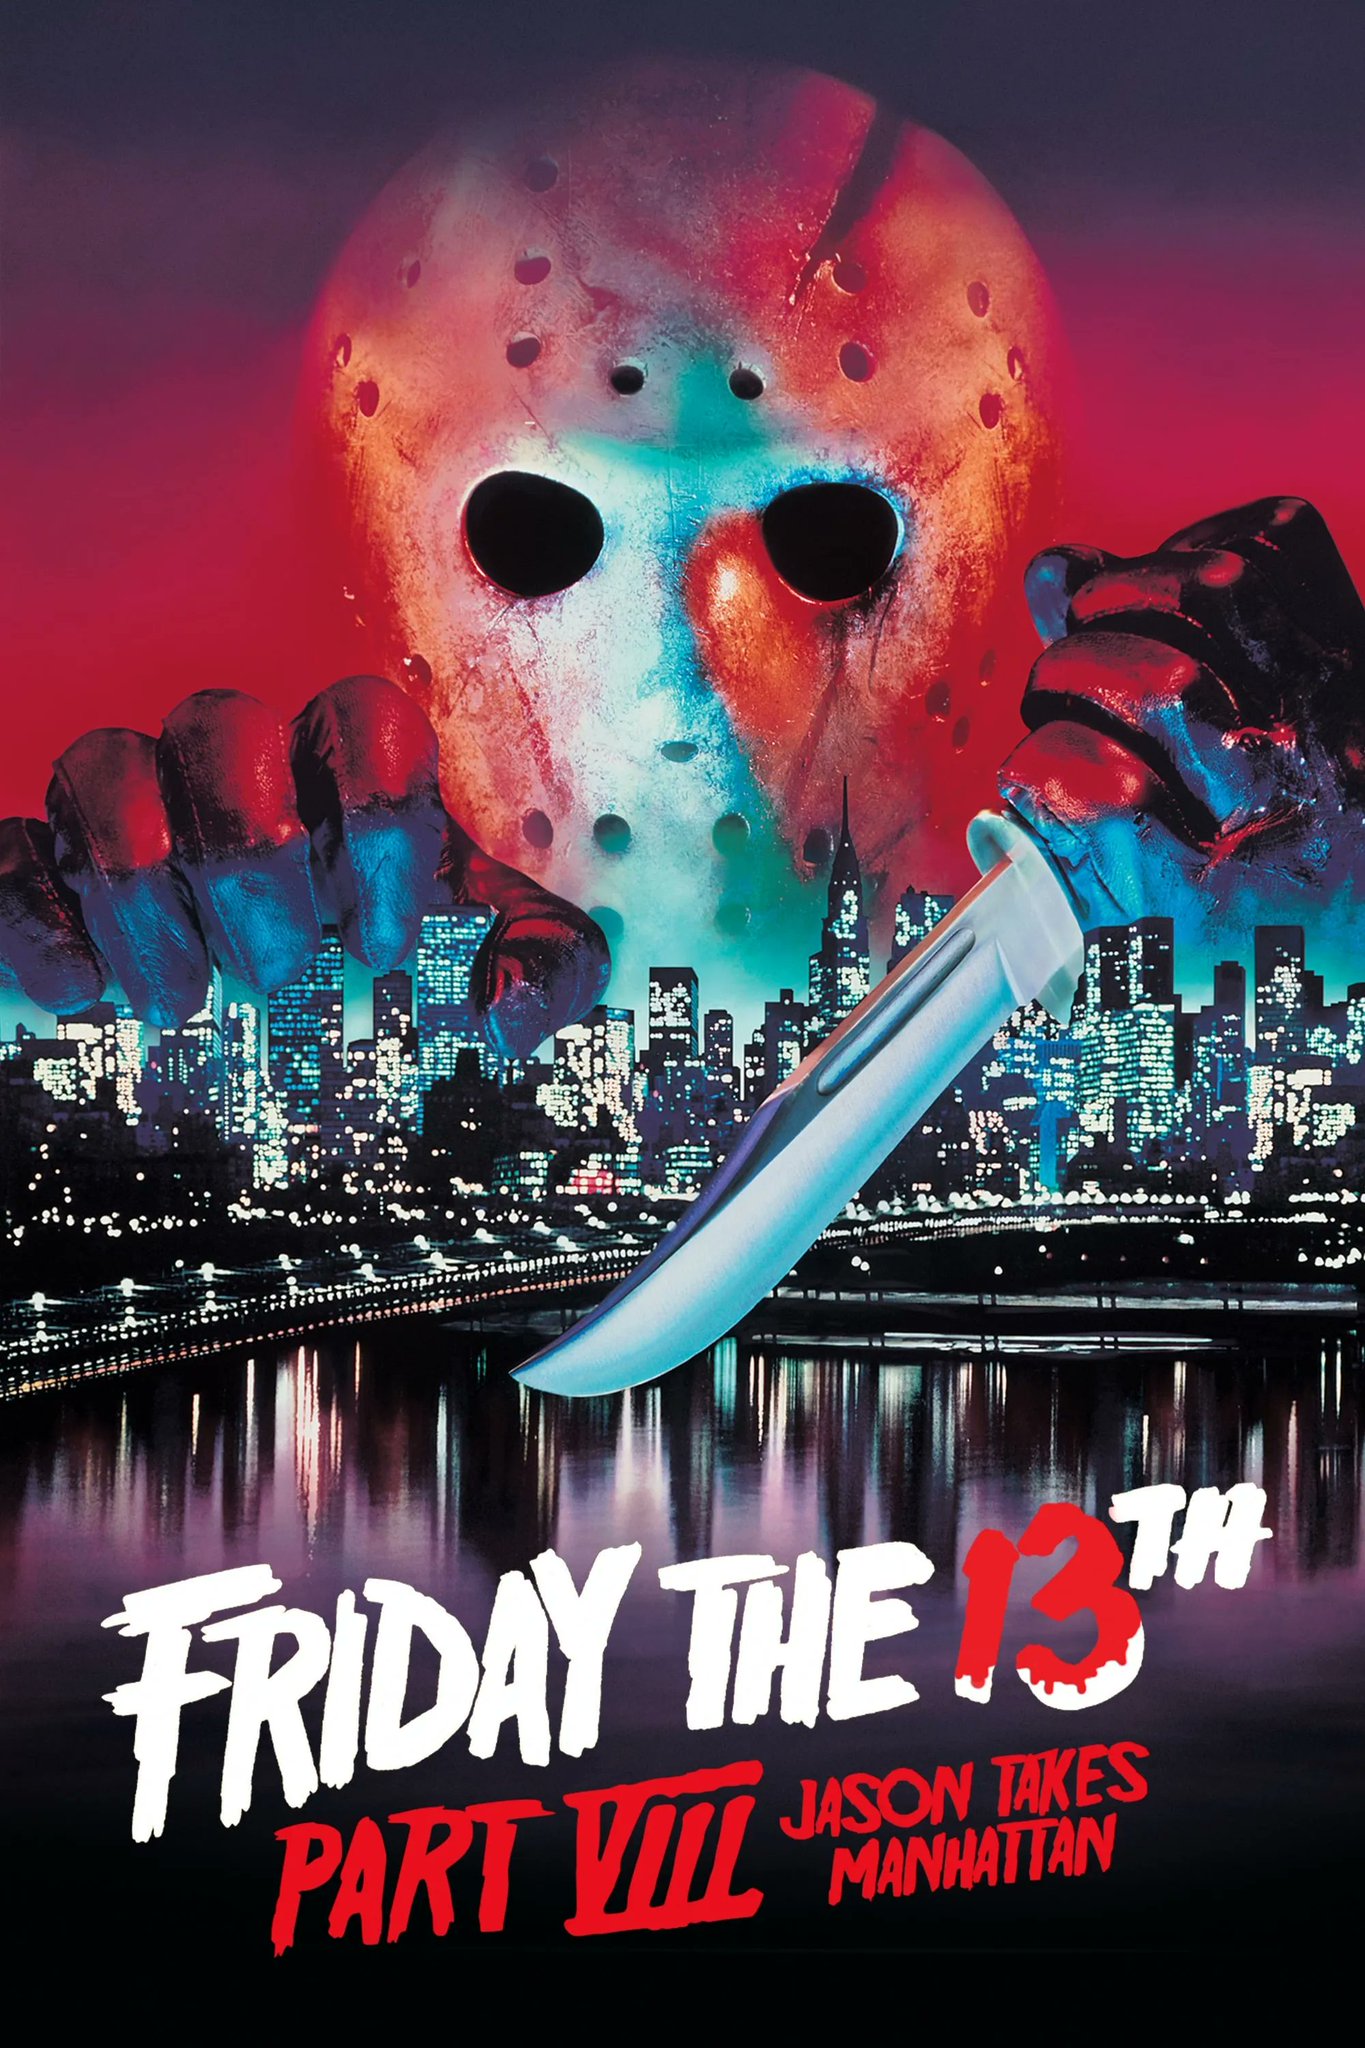 Sluts And Guts On Twitter Friday The 13th Part Viii Jason Takes